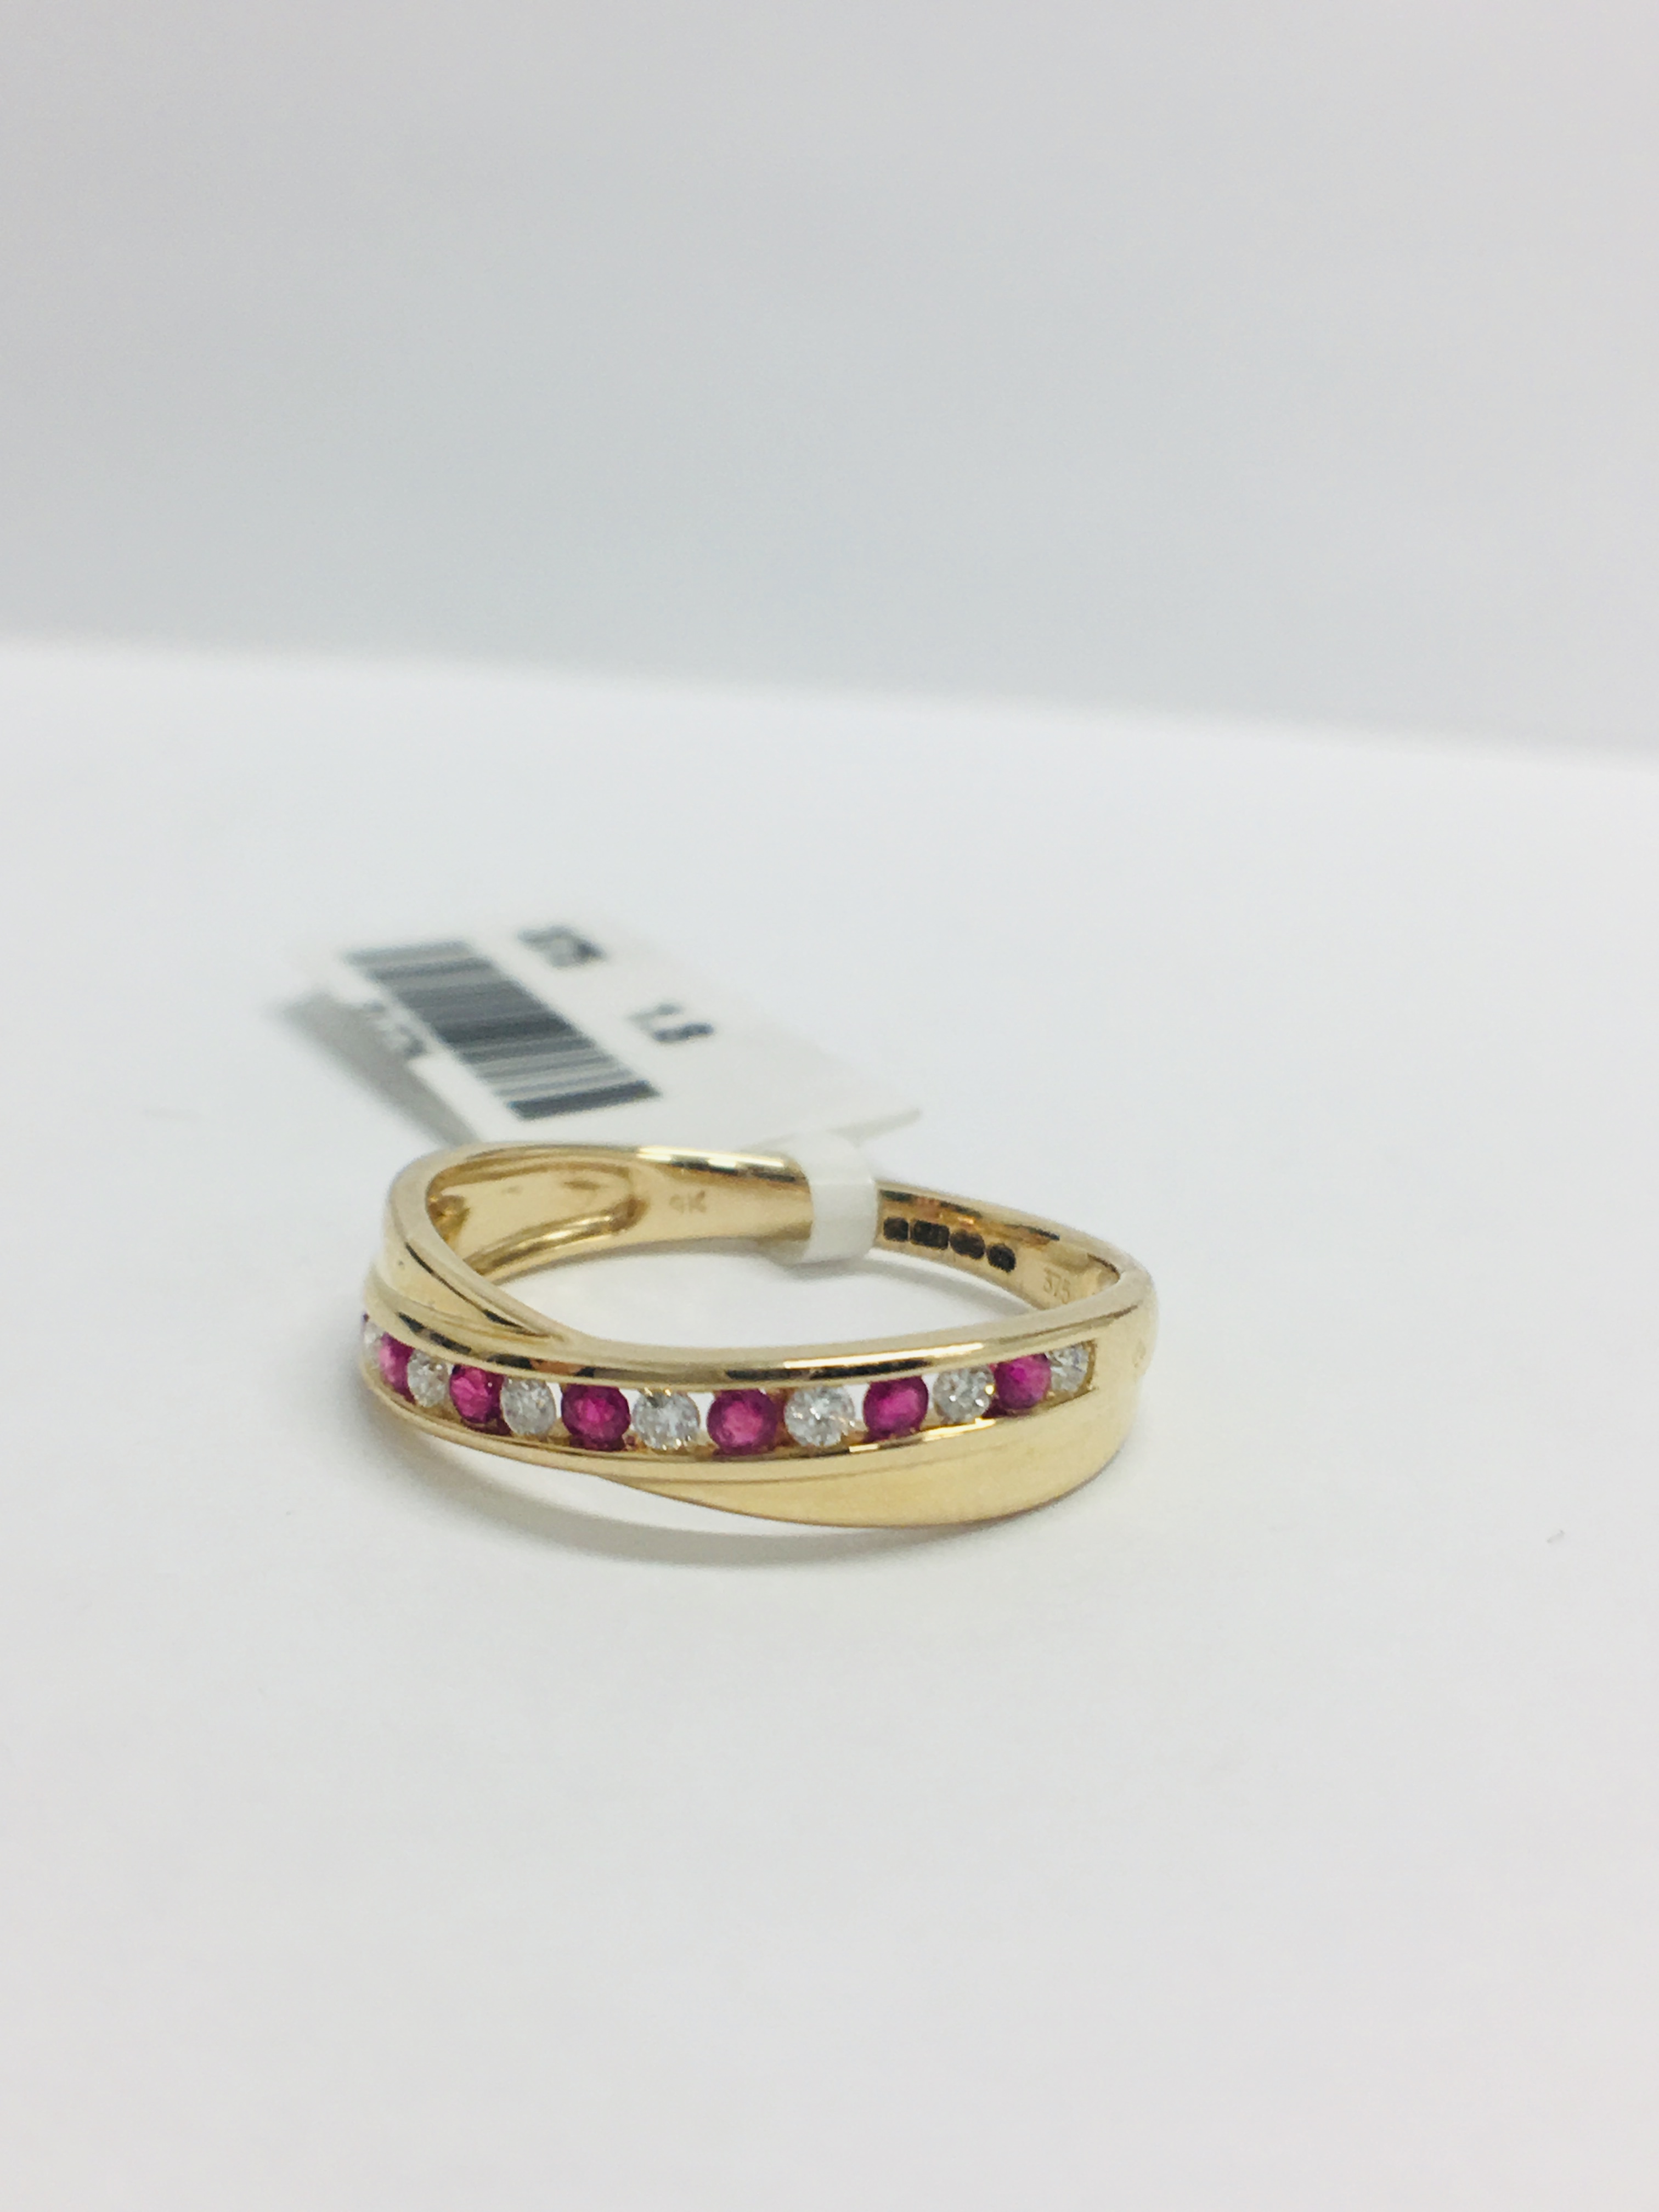 9Ct Yellow Gold Ruby Diamond Crossover Band Ring, - Image 7 of 8